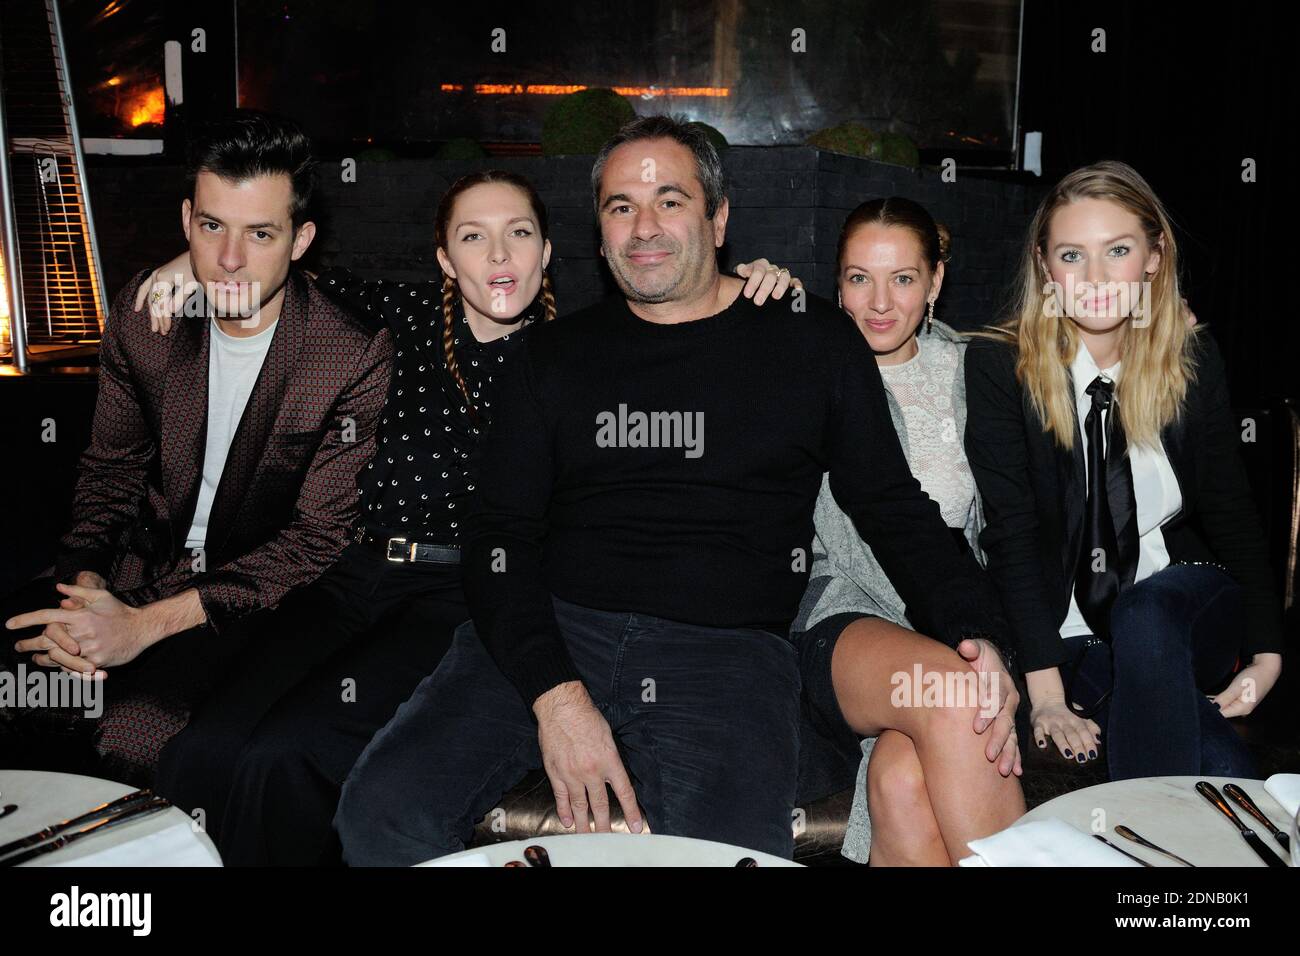 Jean-Yves Le Fur, Jennifer Eymere, Dylan Frances Penn, Mark Ronson and Josephine de la Baume attending Jalouse party at l' Arc in Paris, France on January 27, 2015. Photo by Alban Wyters/ABACAPRESS.COM Stock Photo